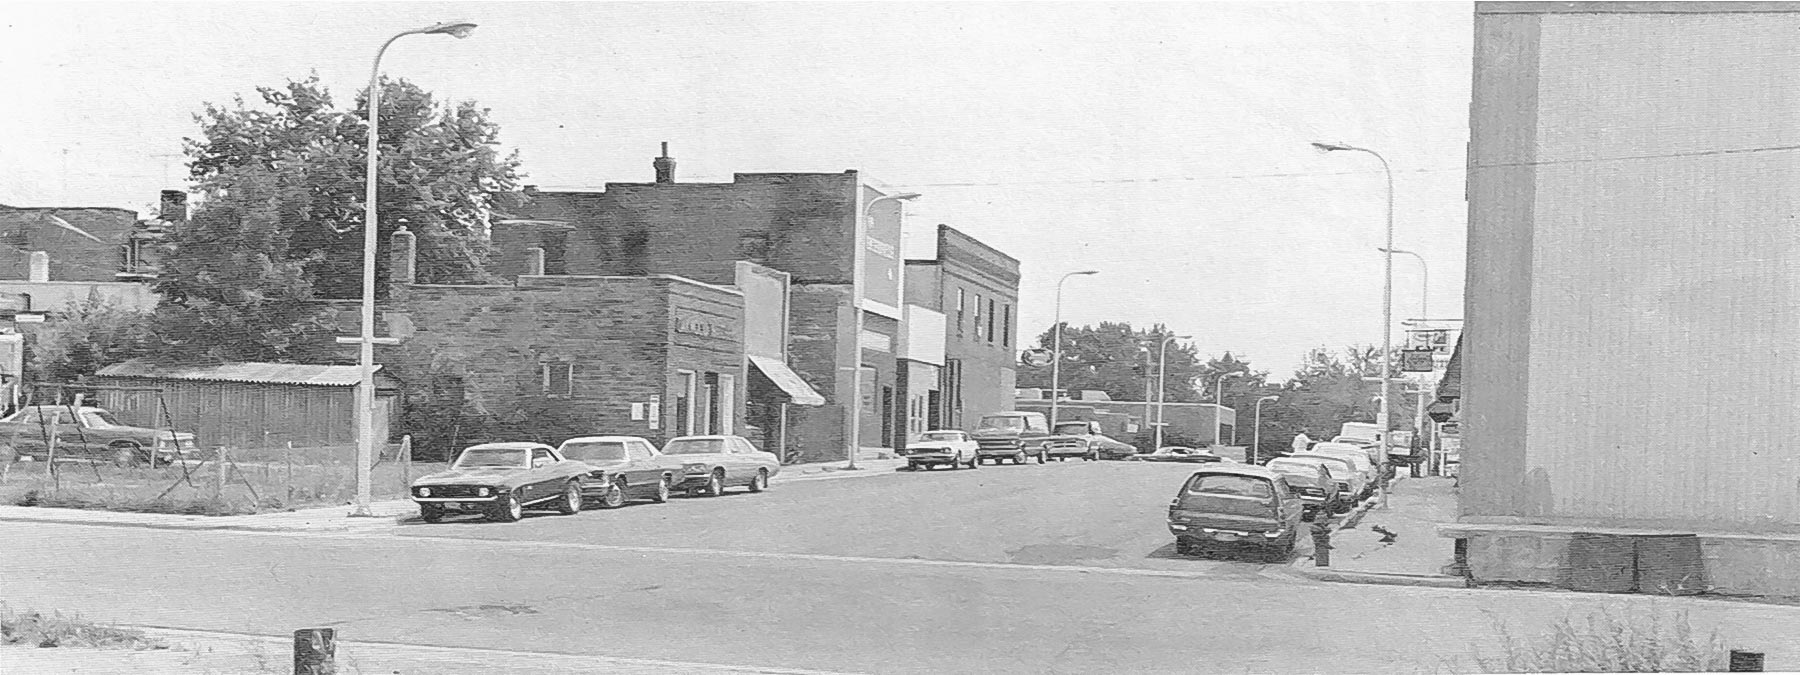 Picture of Millard Avenue looking south fro rail road tracks, 1976.